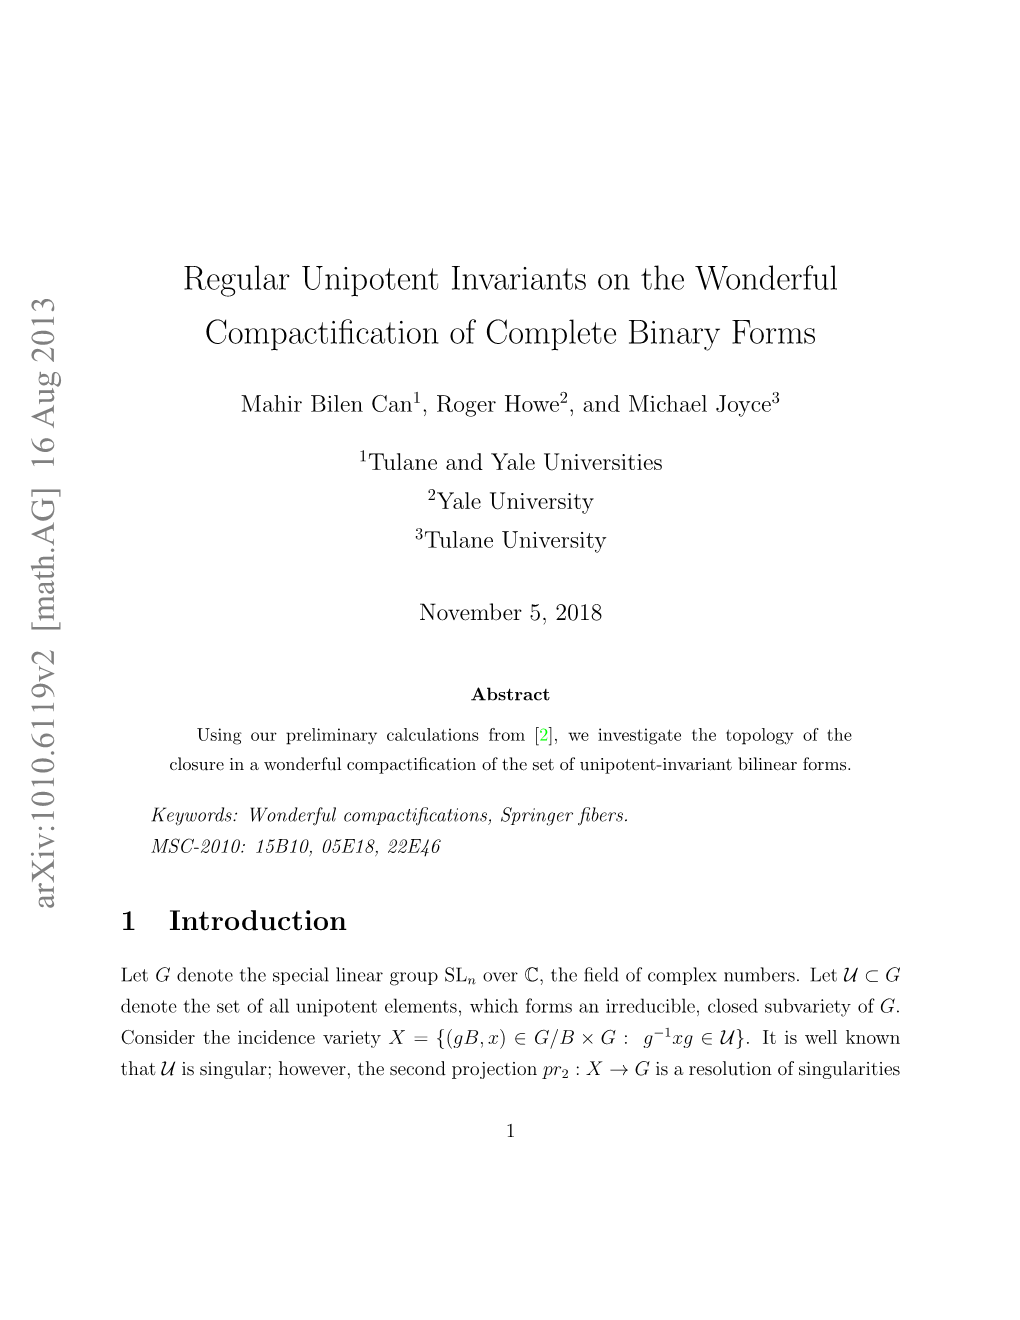 Regular Unipotent Invariants on the Wonderful Compactification Of